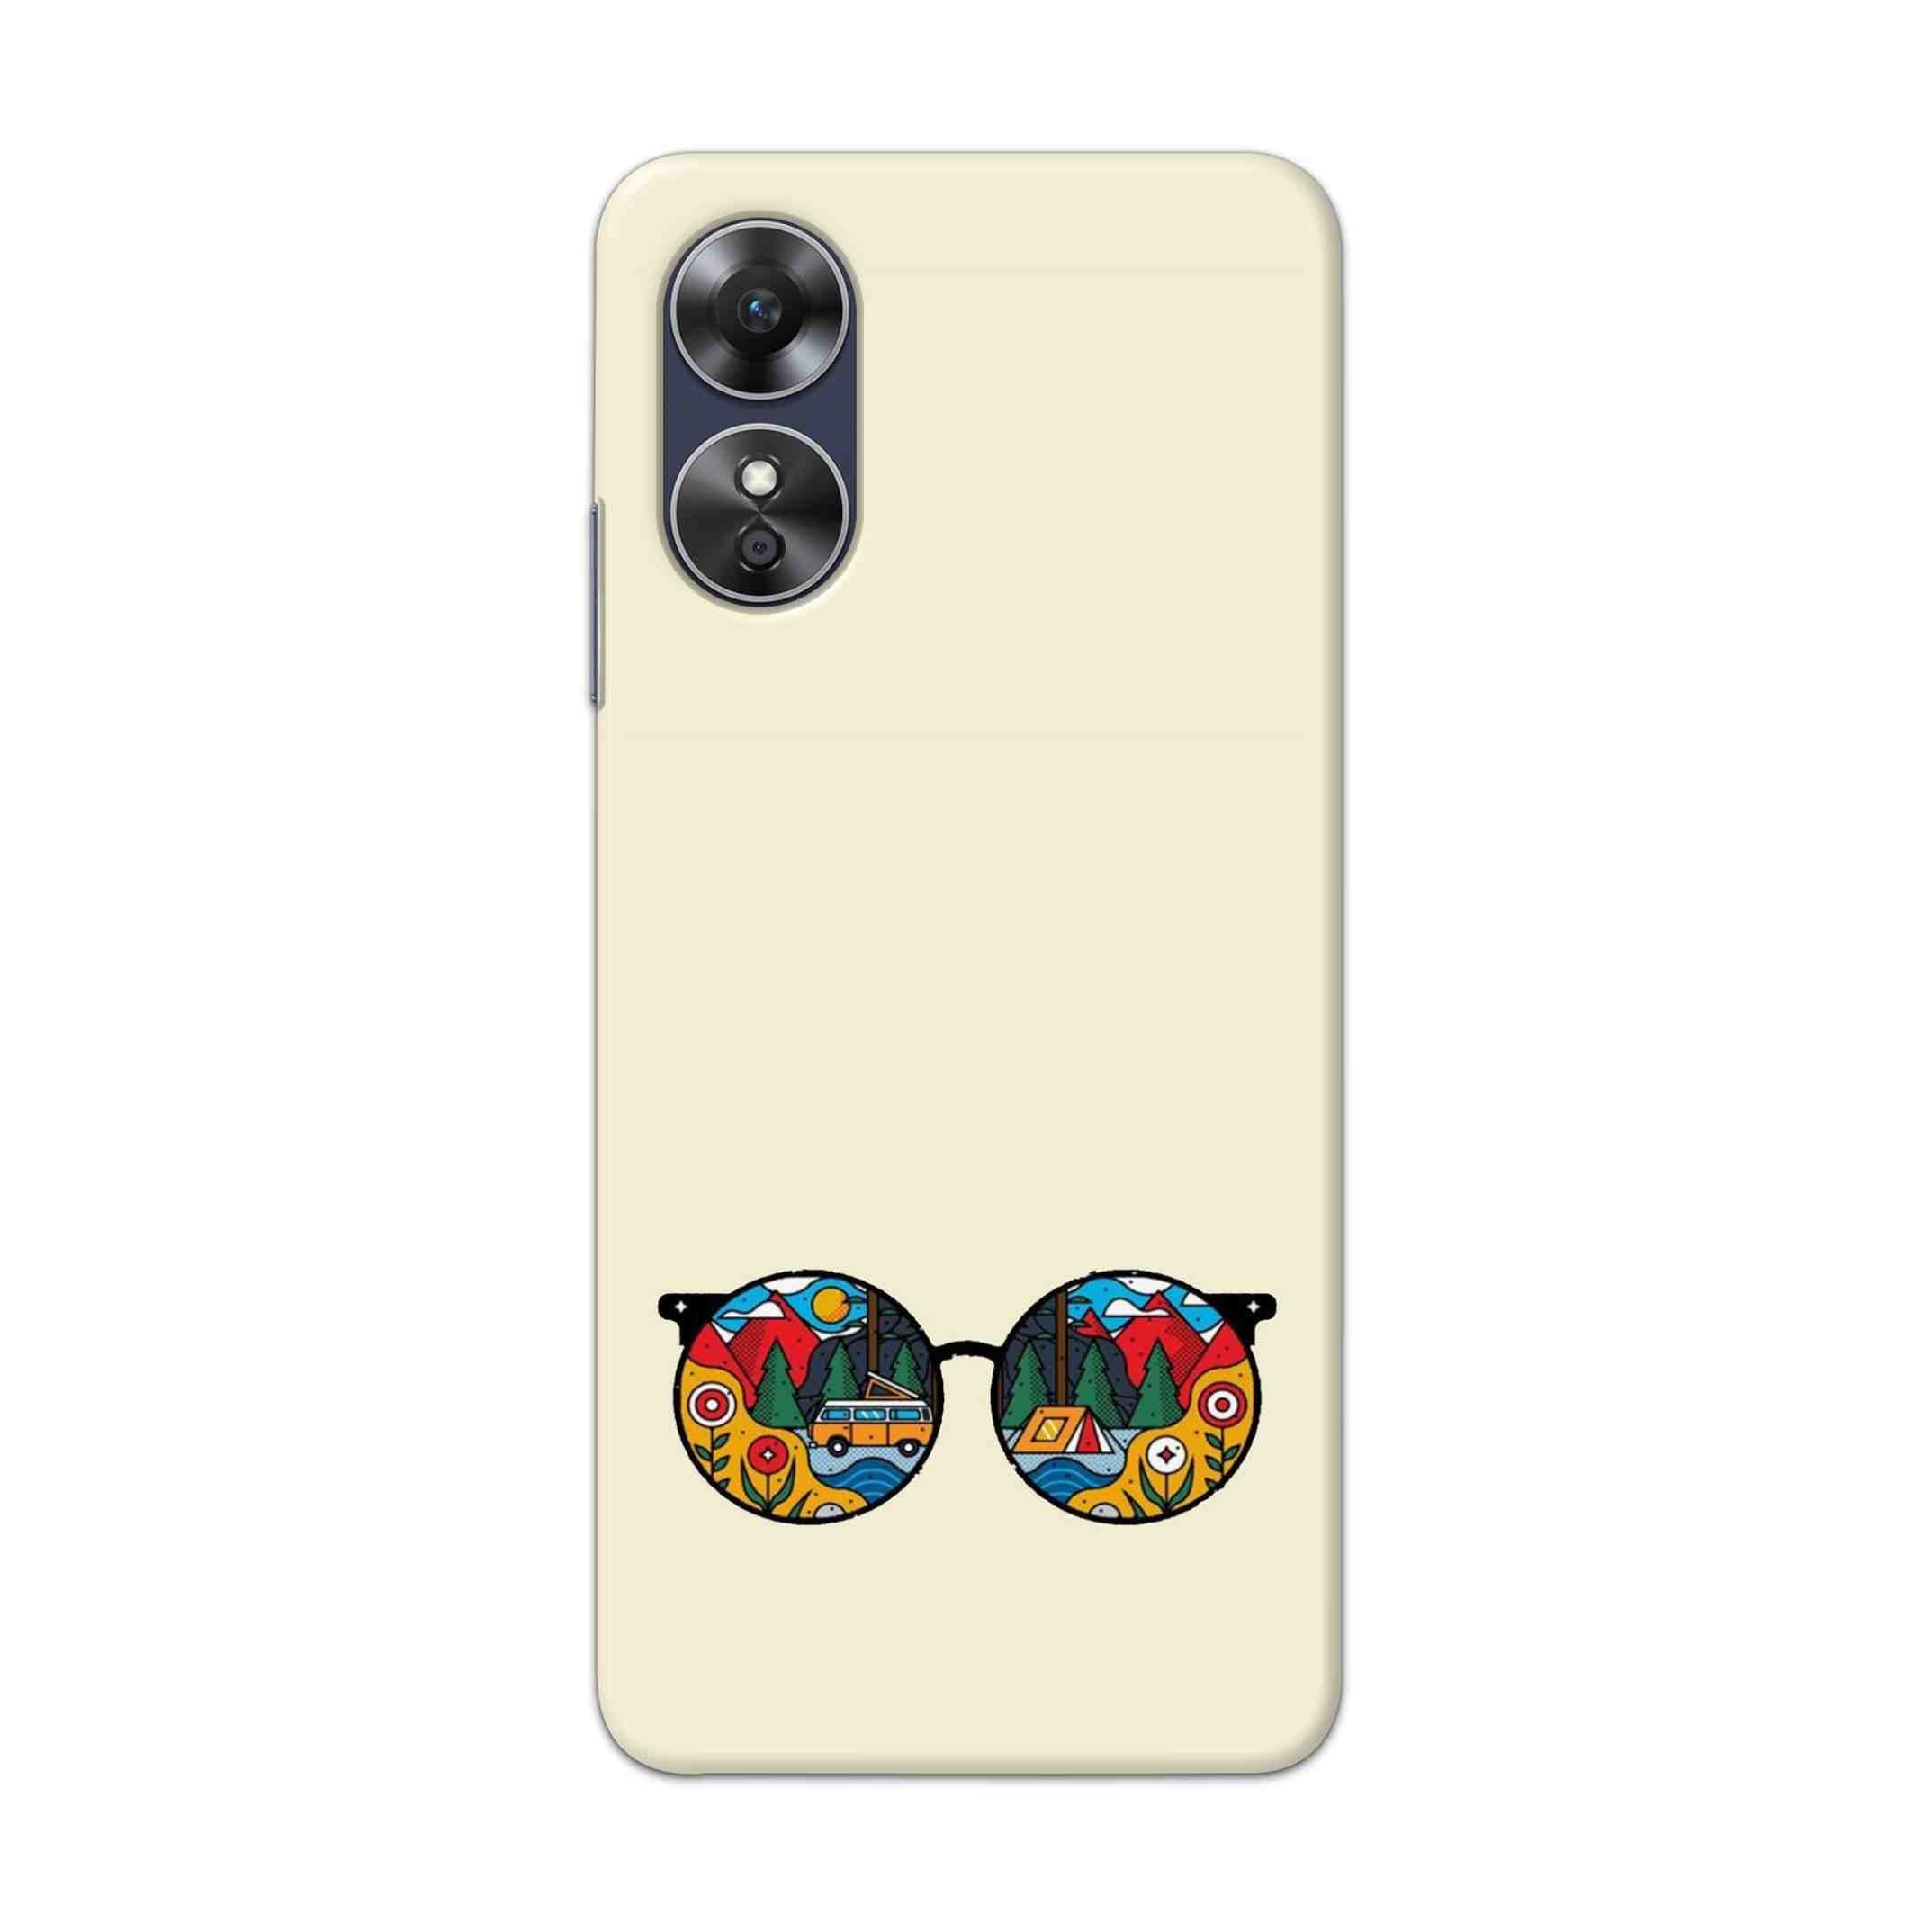 Buy Rainbow Sunglasses Hard Back Mobile Phone Case Cover For Oppo A17 Online